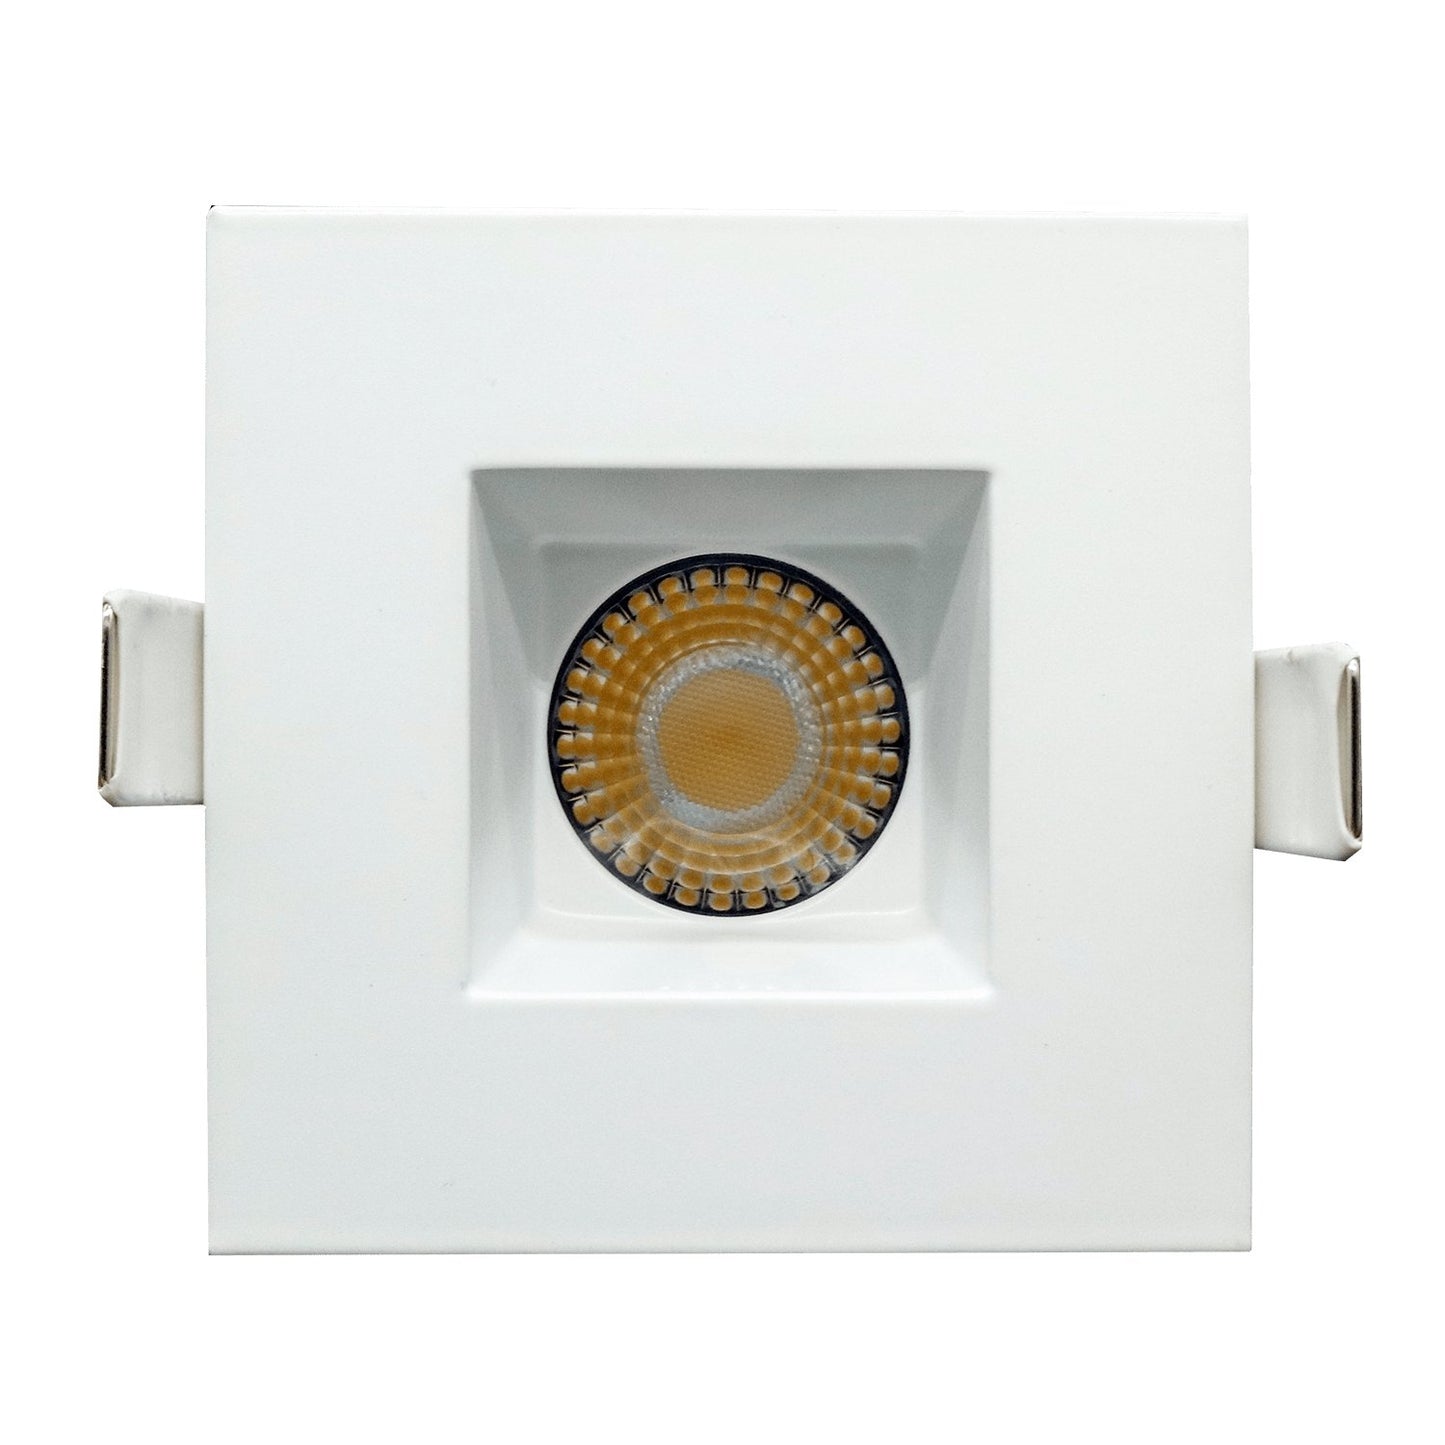 GDL-G48342Goodlite Changeable Trim for 2" 8W/14W Regress Luminaire Selectable CCT